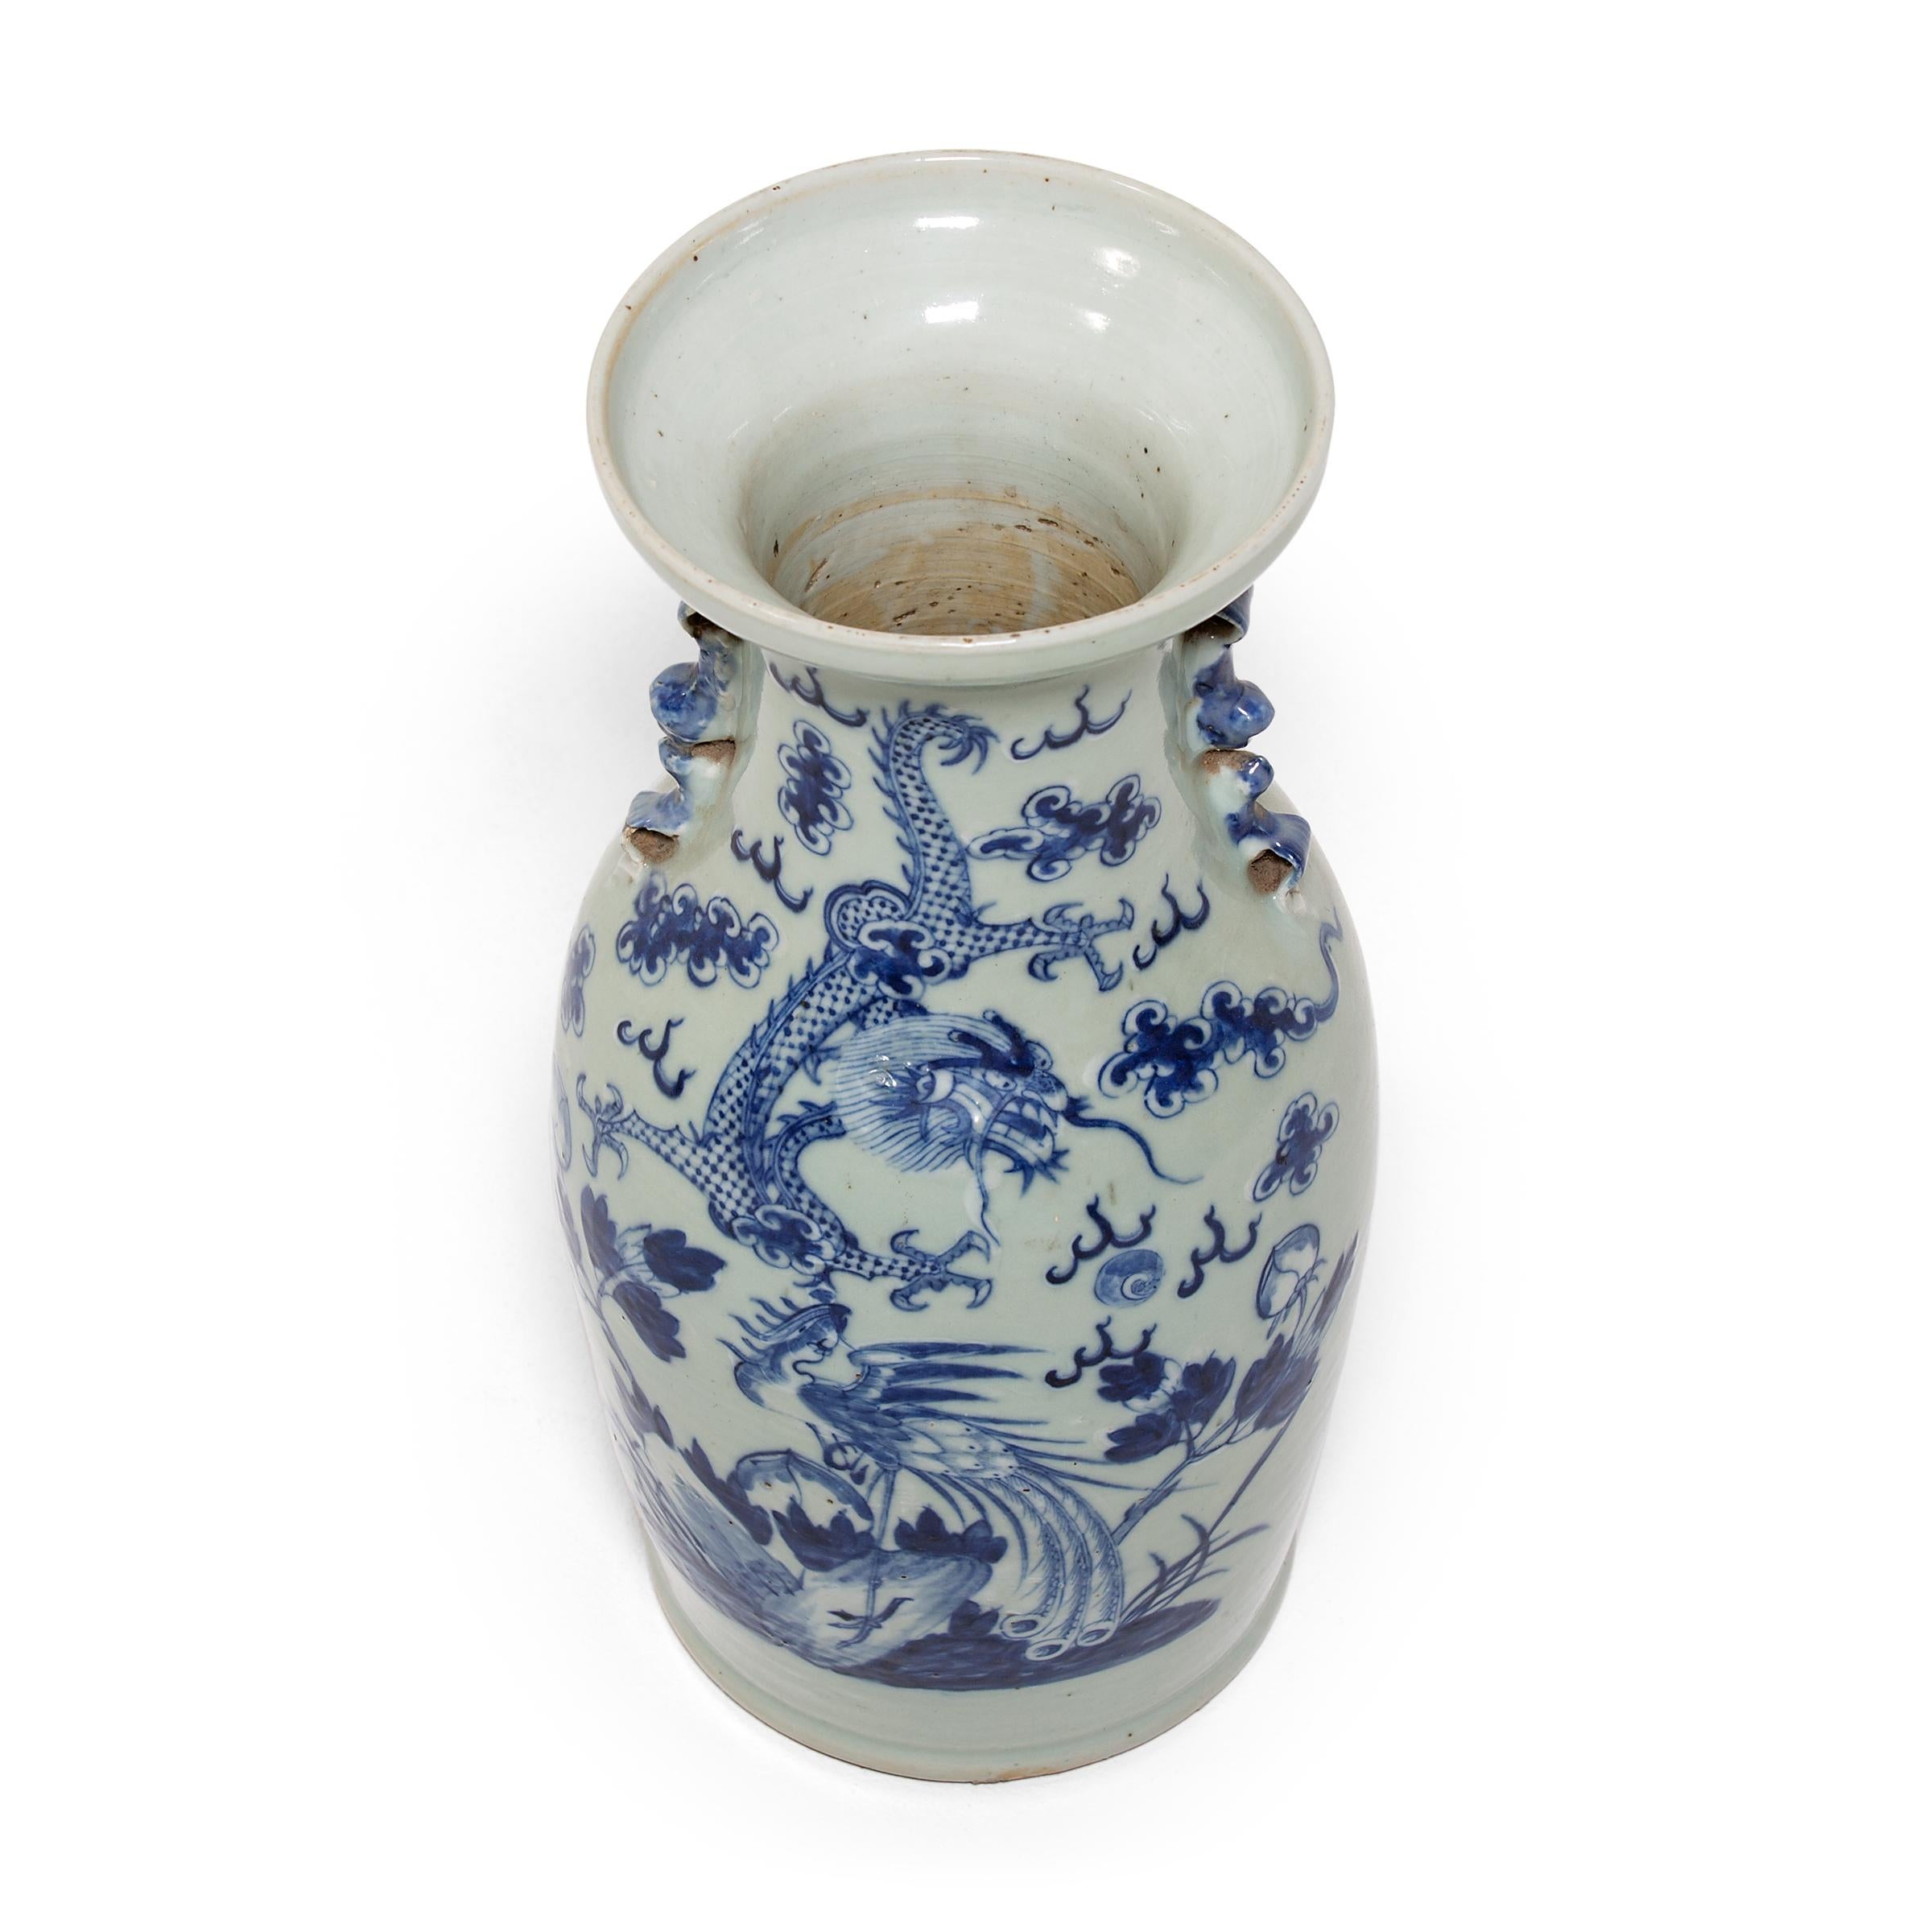 Glazed Chinese Blue and White Dragon and Phoenix Fantail Vase, c. 1850